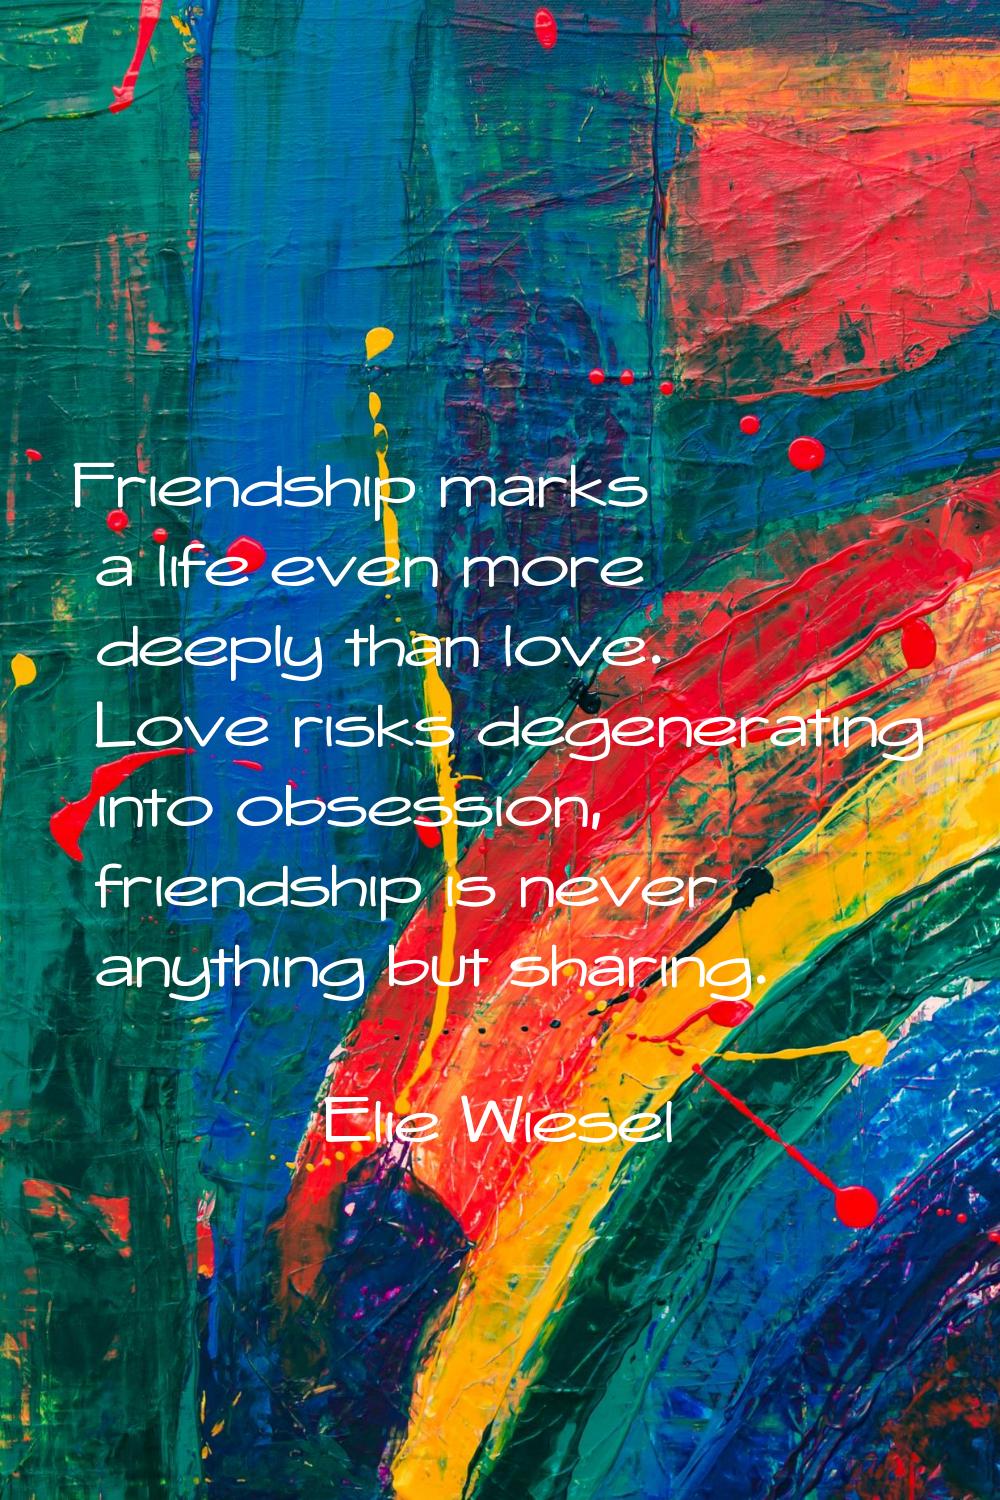 Friendship marks a life even more deeply than love. Love risks degenerating into obsession, friends